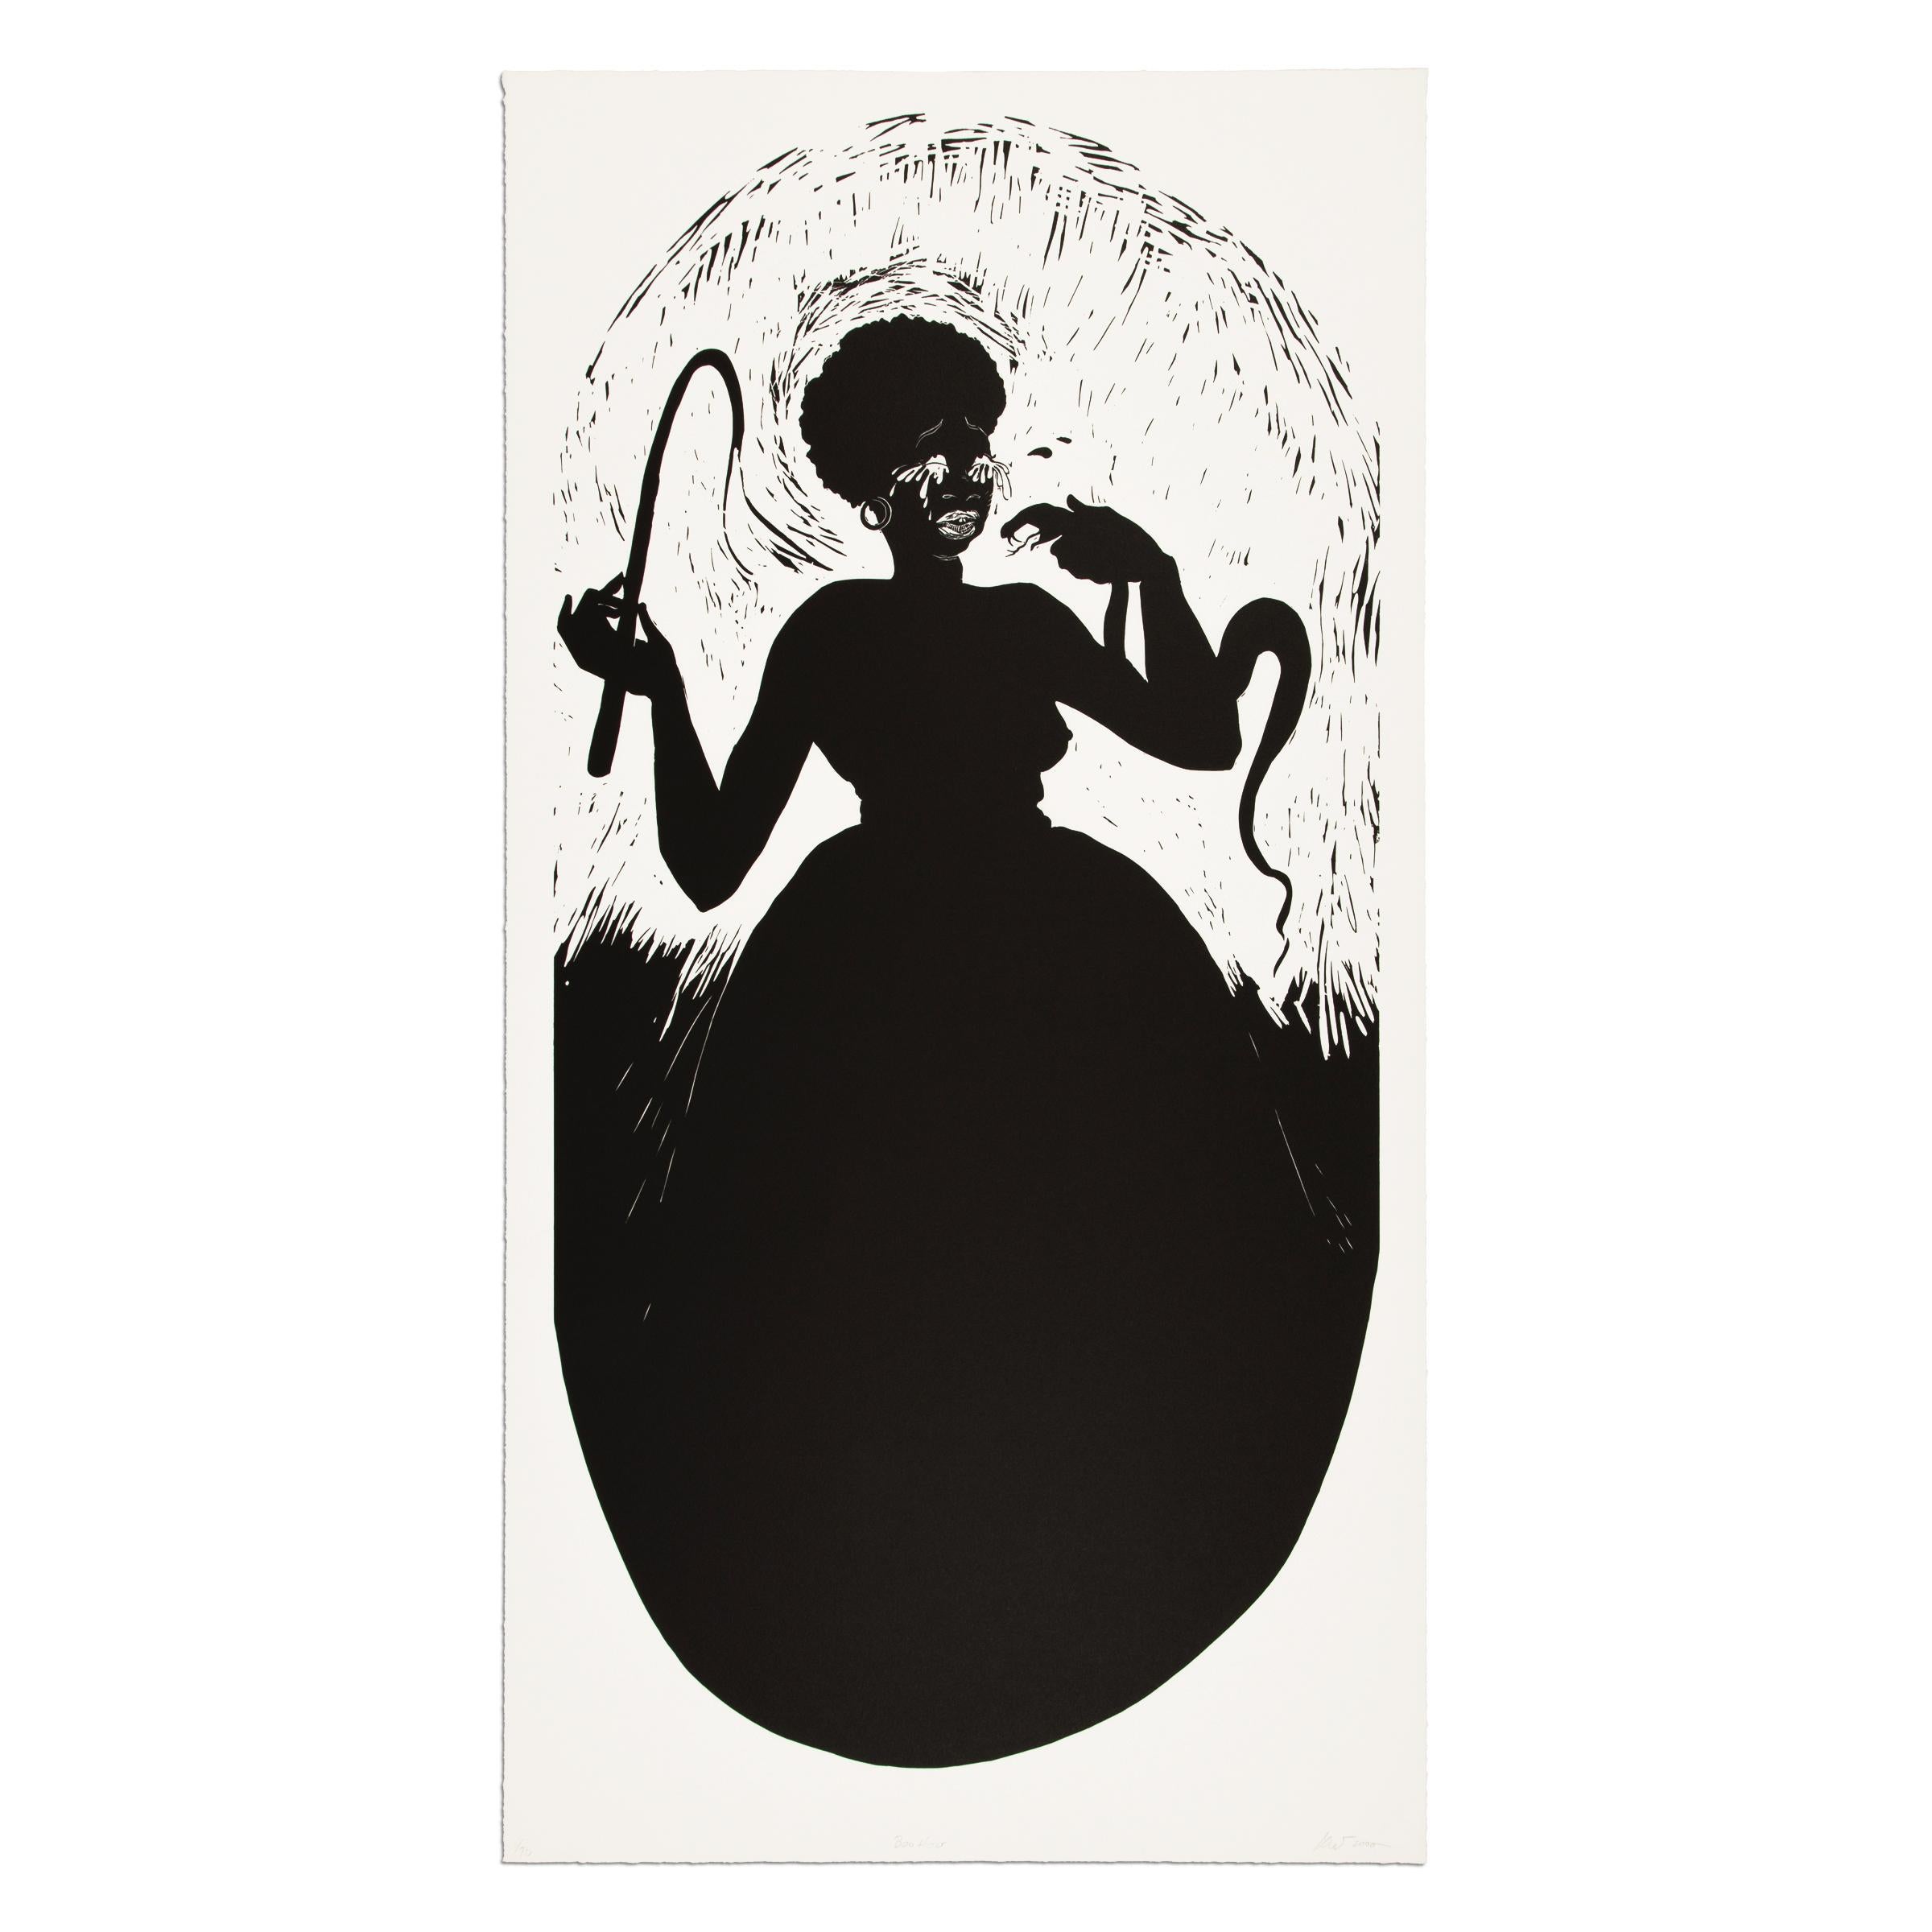 Kara Walker (American, b. 1969)
Boo-Hoo, 2000
Medium: Linocut on Arches Cover paper
Dimensions: 100.8 x 52.4 cm (40 x 20 1/2 in)
Edition of 70 + XXX: Hand-signed, titled, dated and numbered in pencil
Publisher: Parkett, Zurich and New York
Printer: